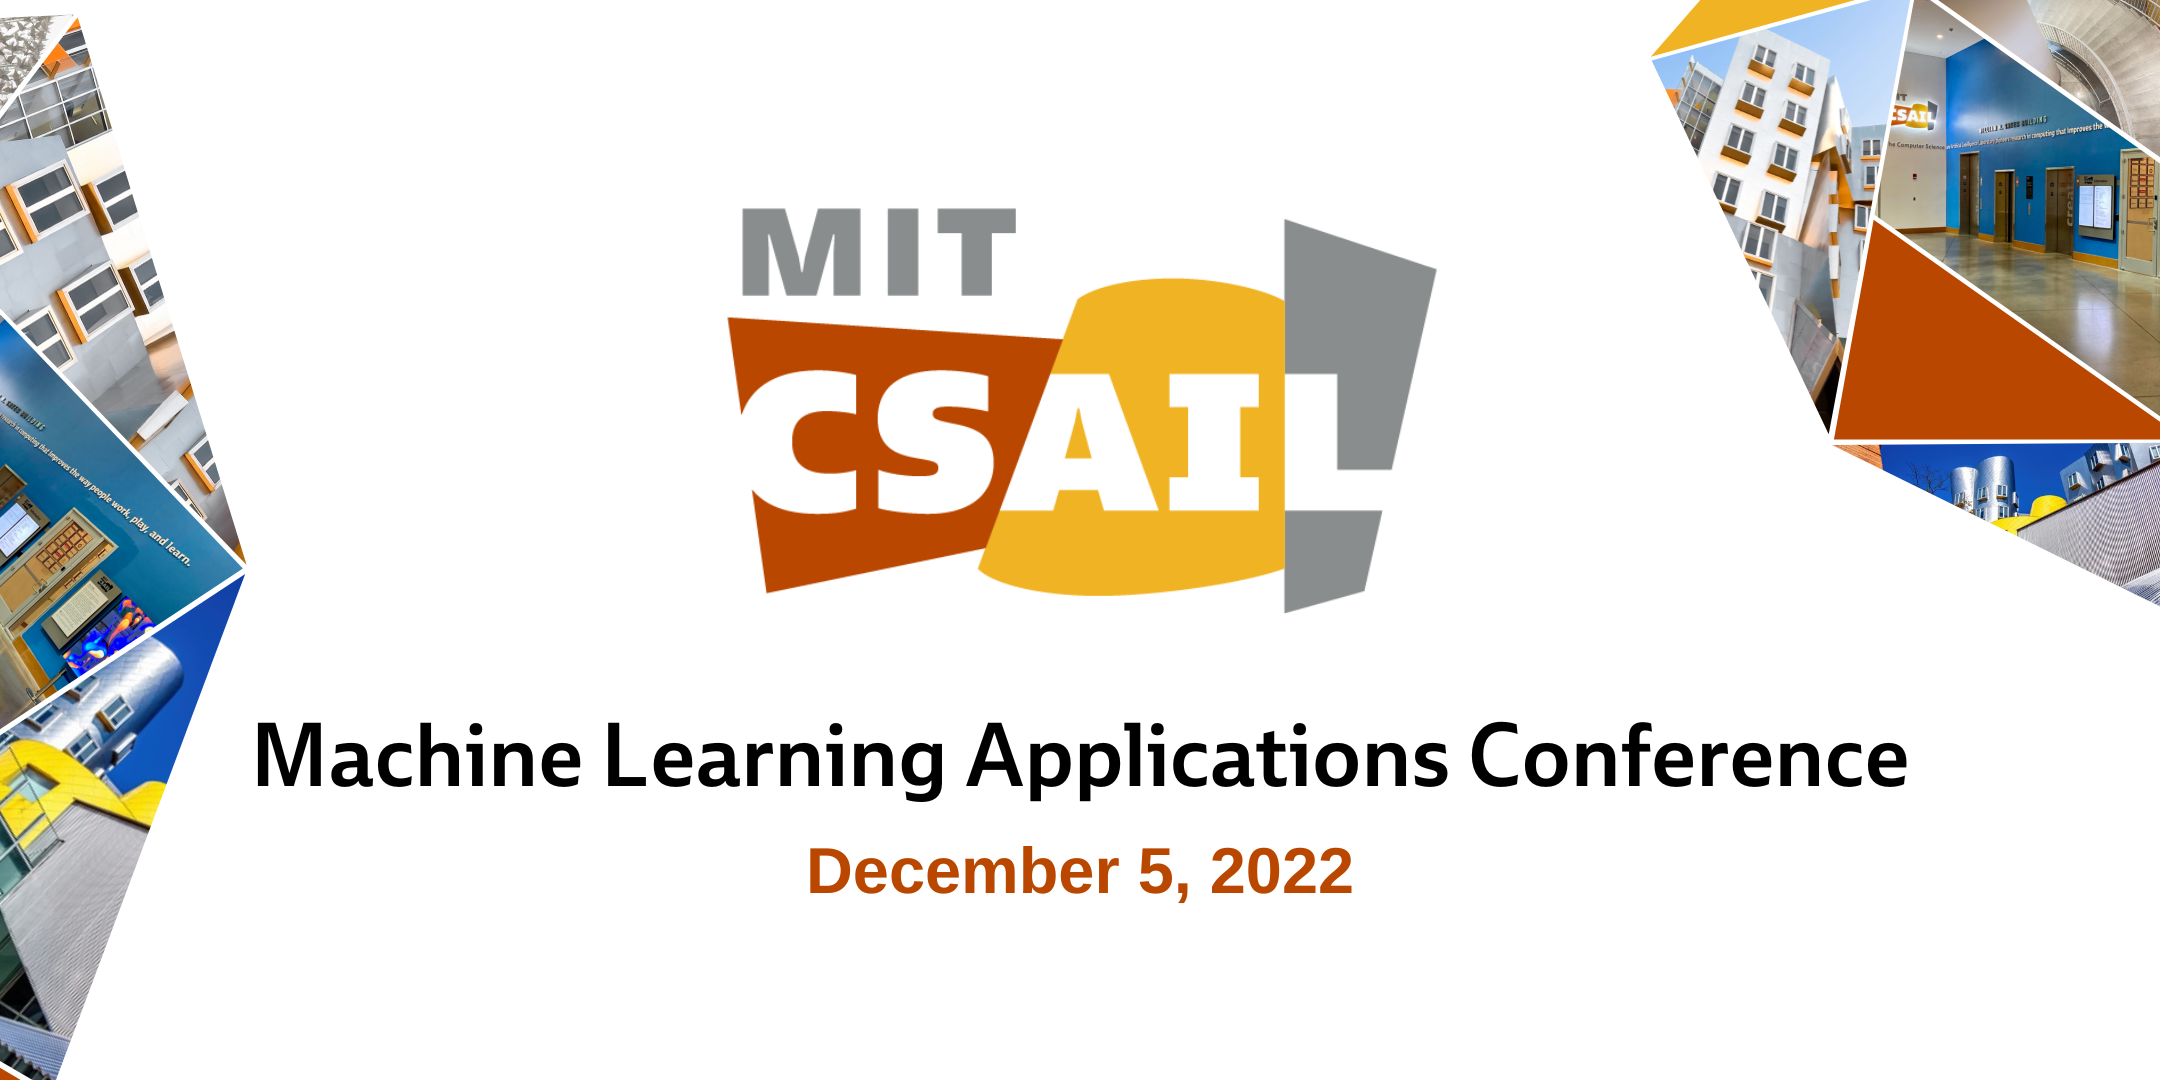 MIT CSAIL Logo with text that reads "Machine Learning Applications Conference: December 5, 2022" with collage images of the Stata Center at MIT